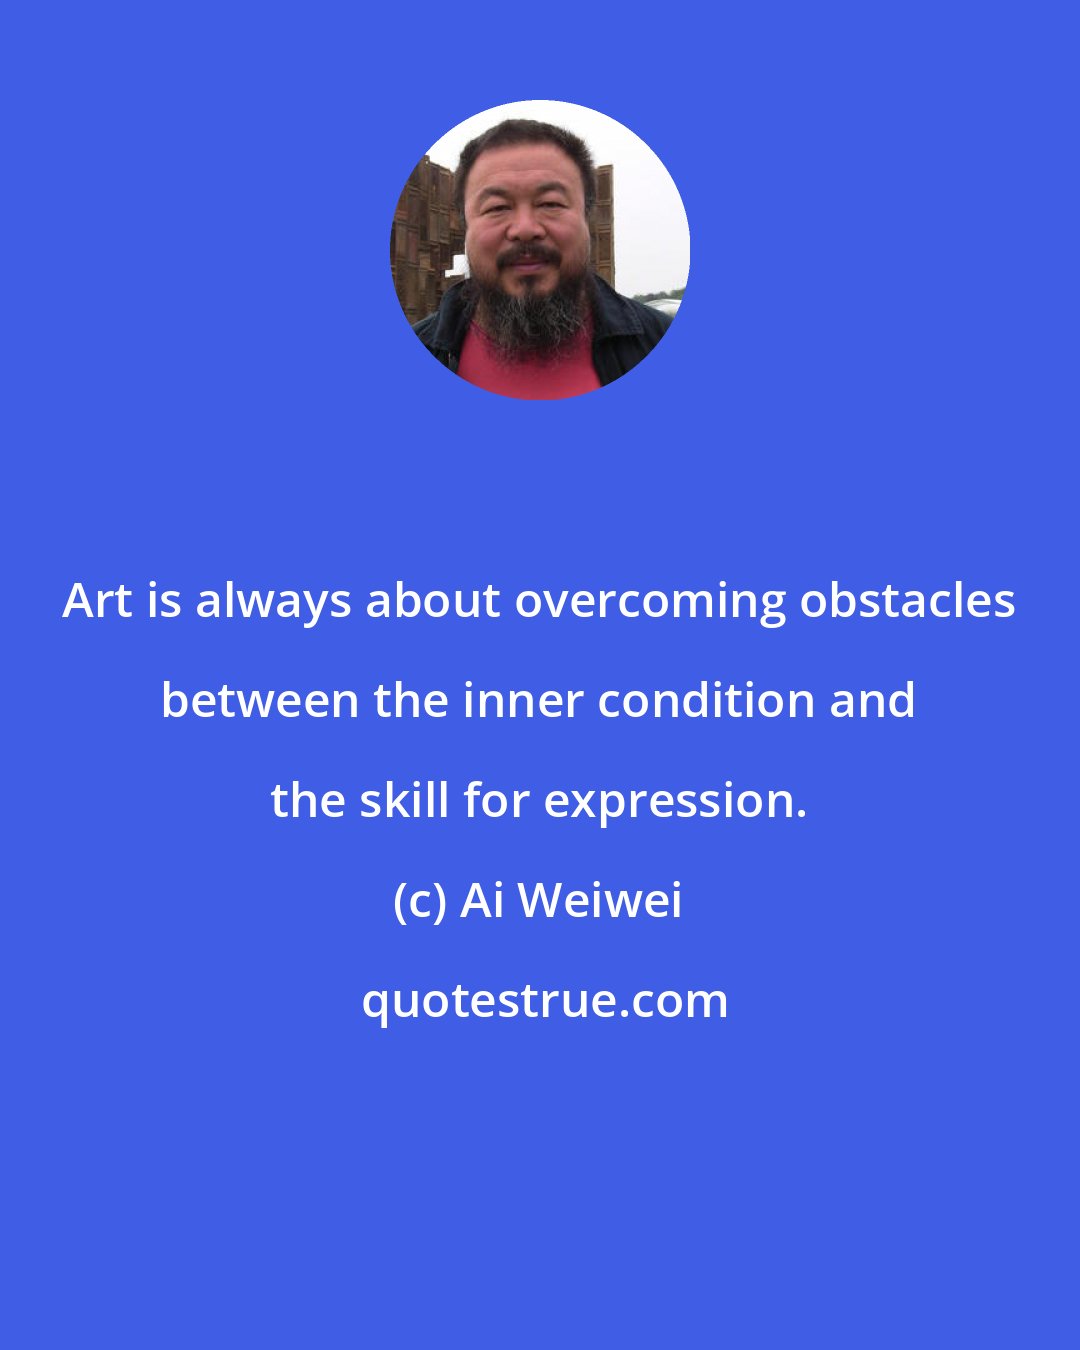 Ai Weiwei: Art is always about overcoming obstacles between the inner condition and the skill for expression.